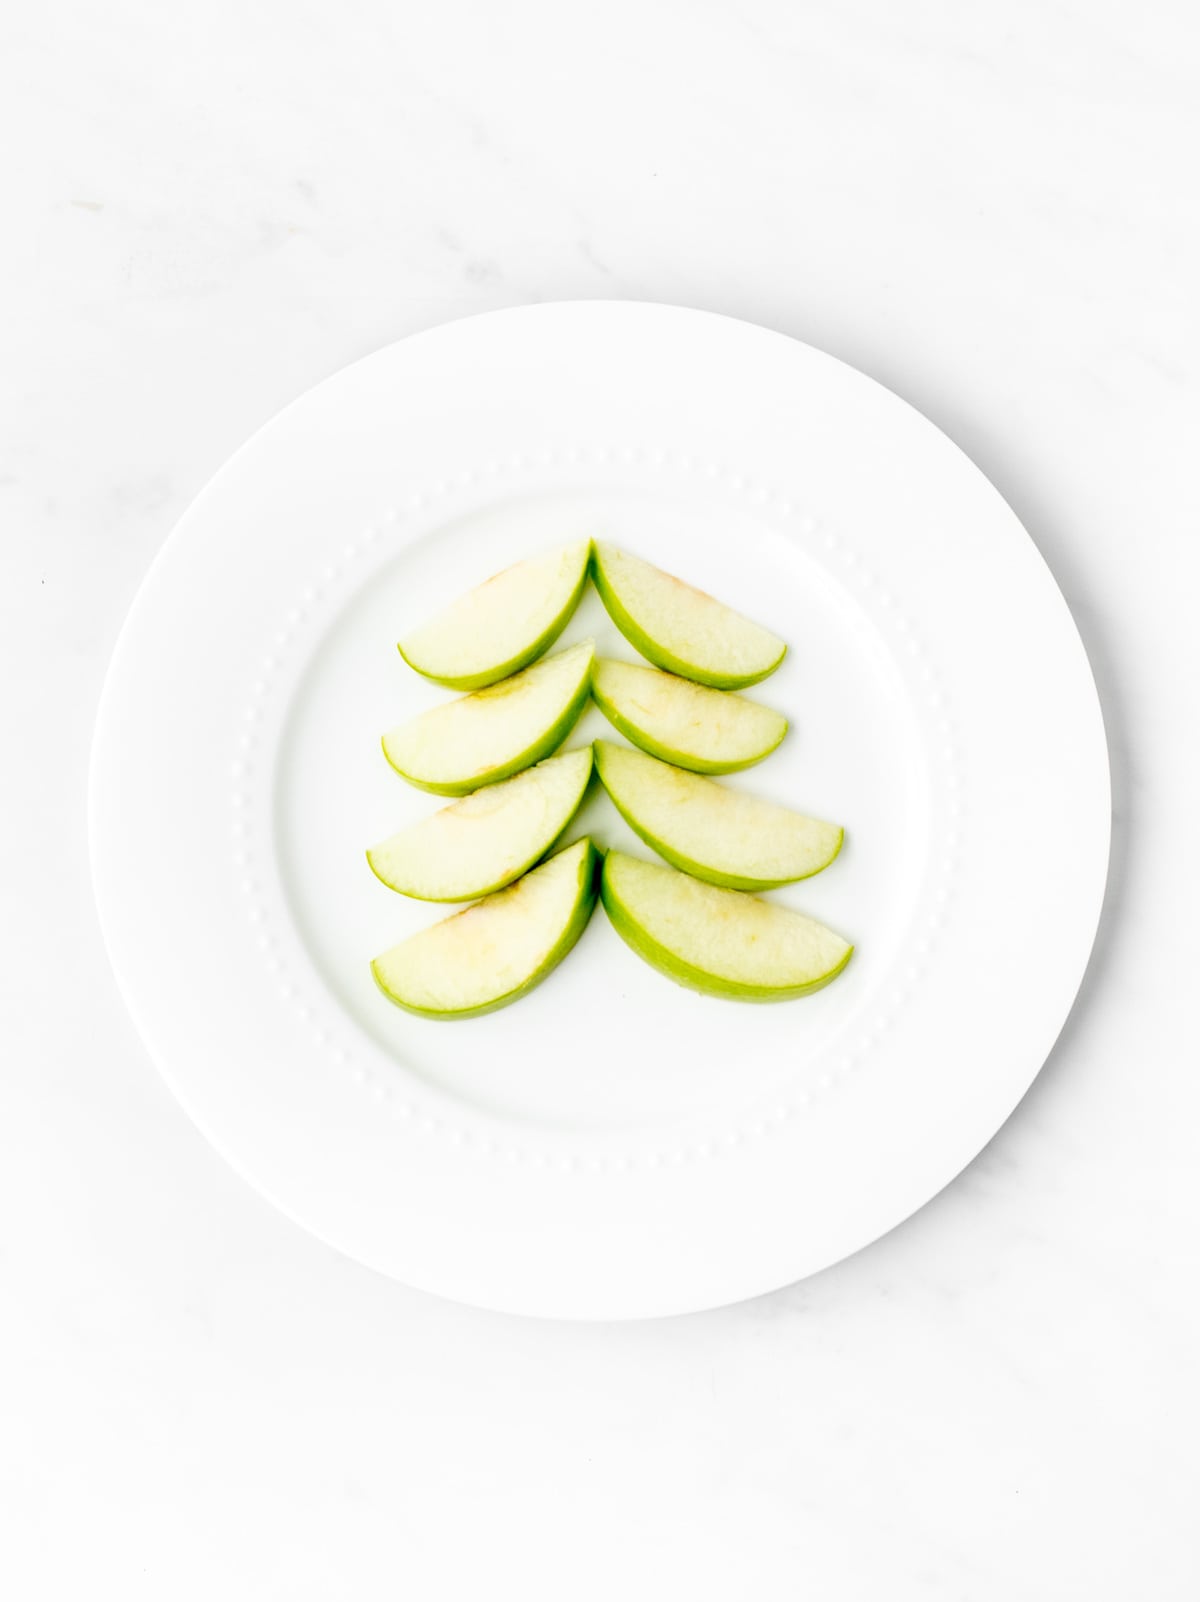 Apple slices on a white plate, spread out to look like a Christmas tree.